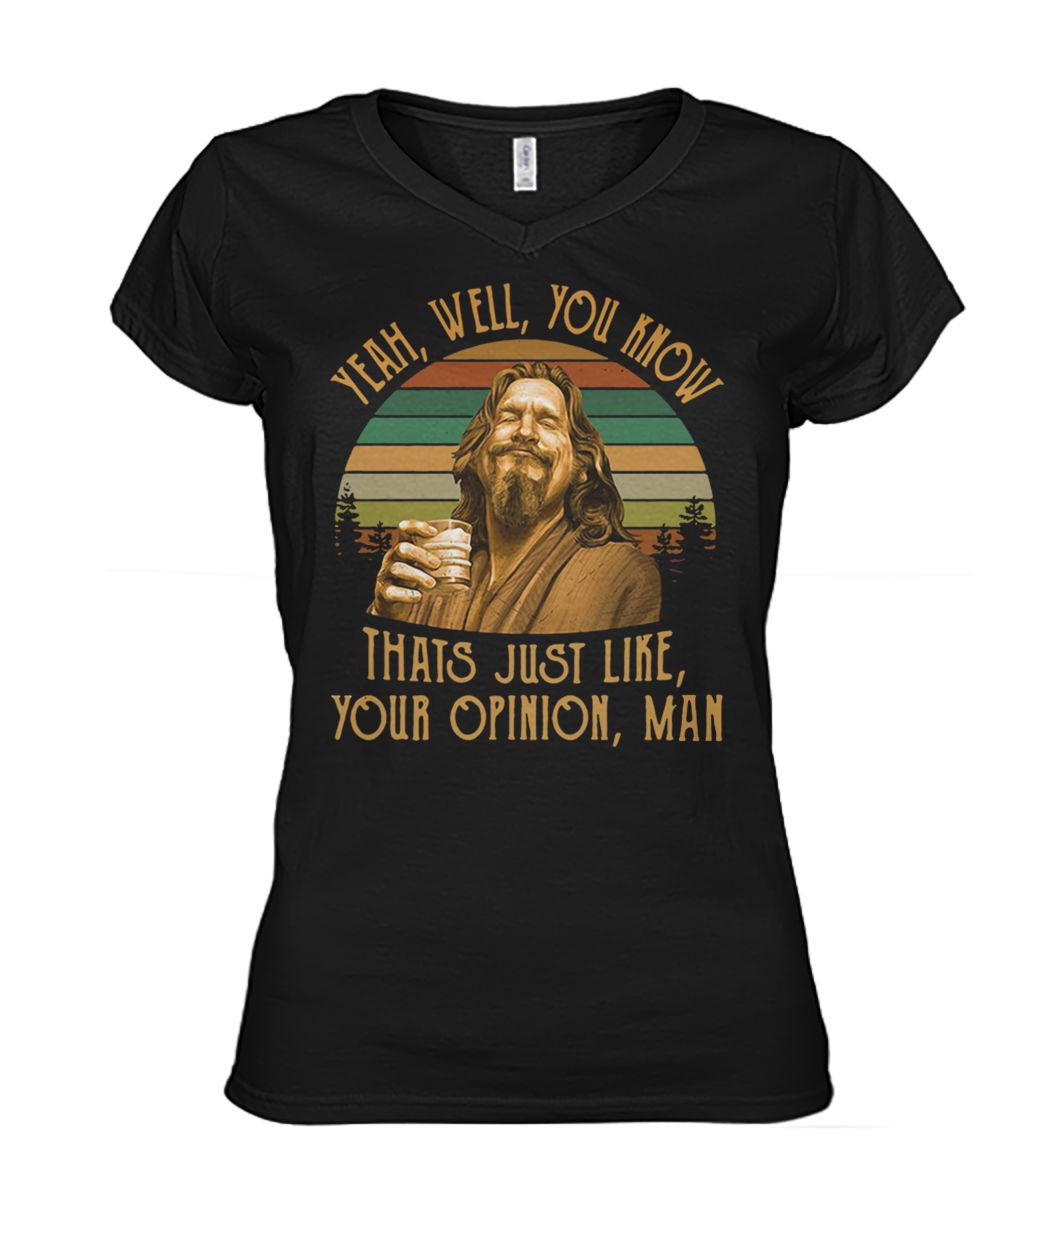 The big lebowski jeff bridges yeah well you know thats just like your opinion man vintage women's v-neck